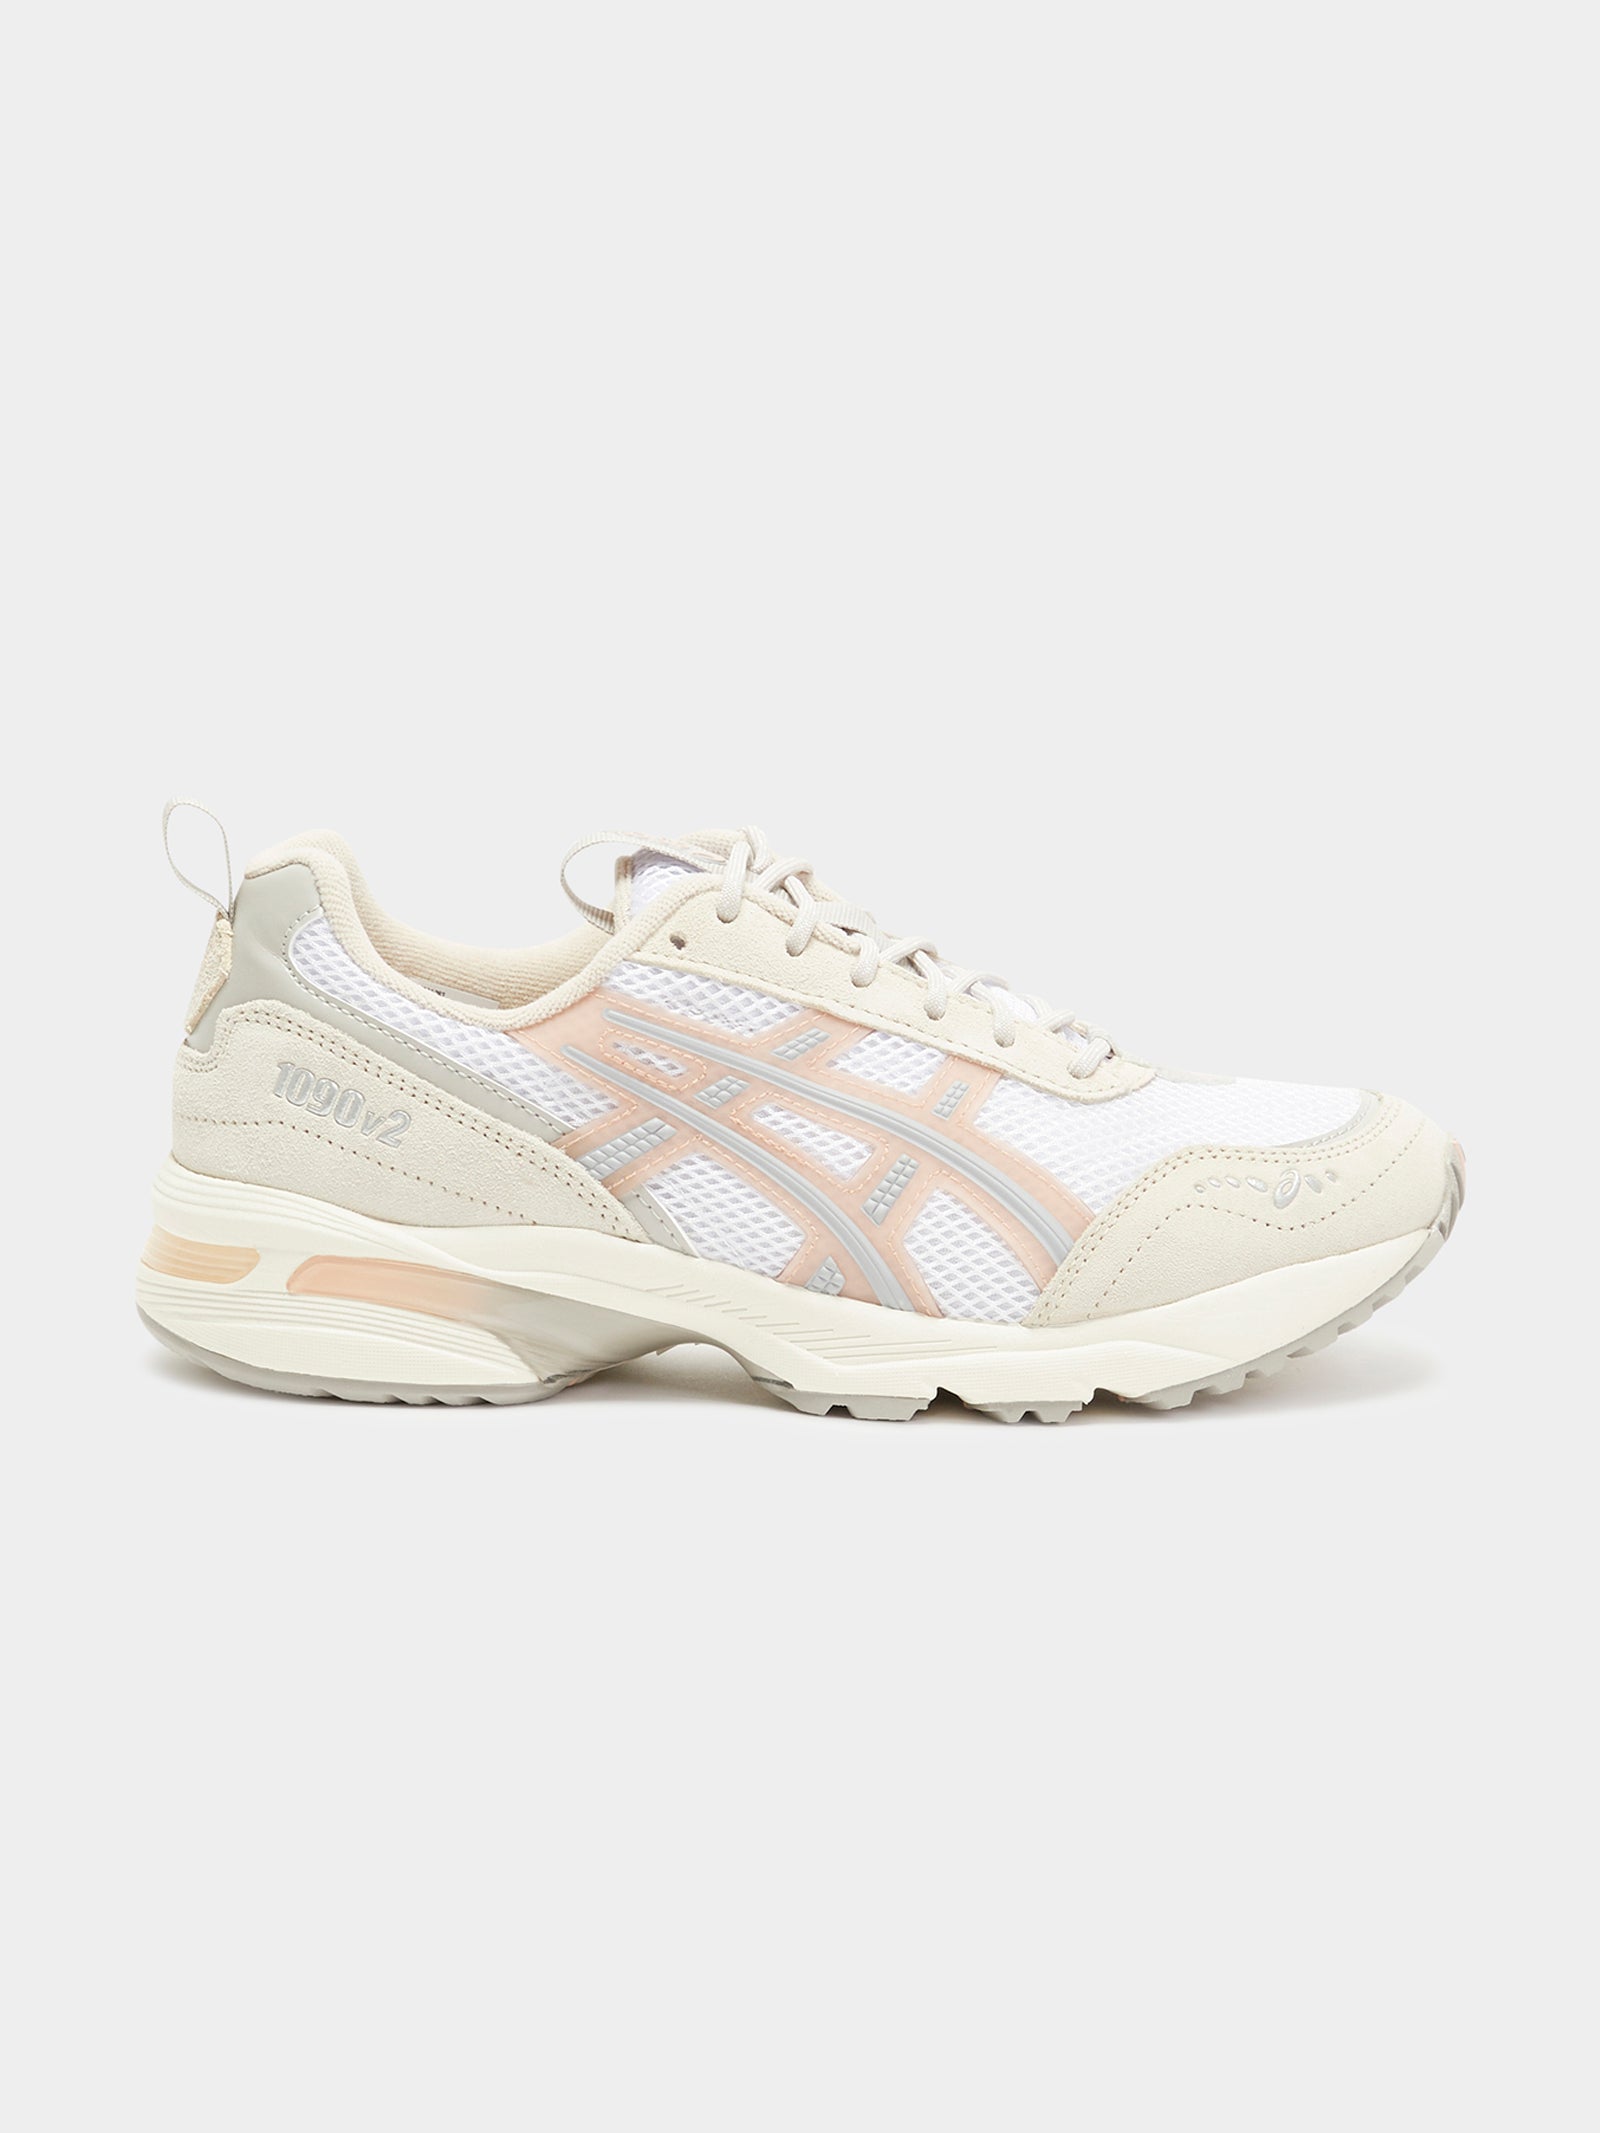 Womens Gel-1090 V2 Sneakers in White & Pink - Glue Store